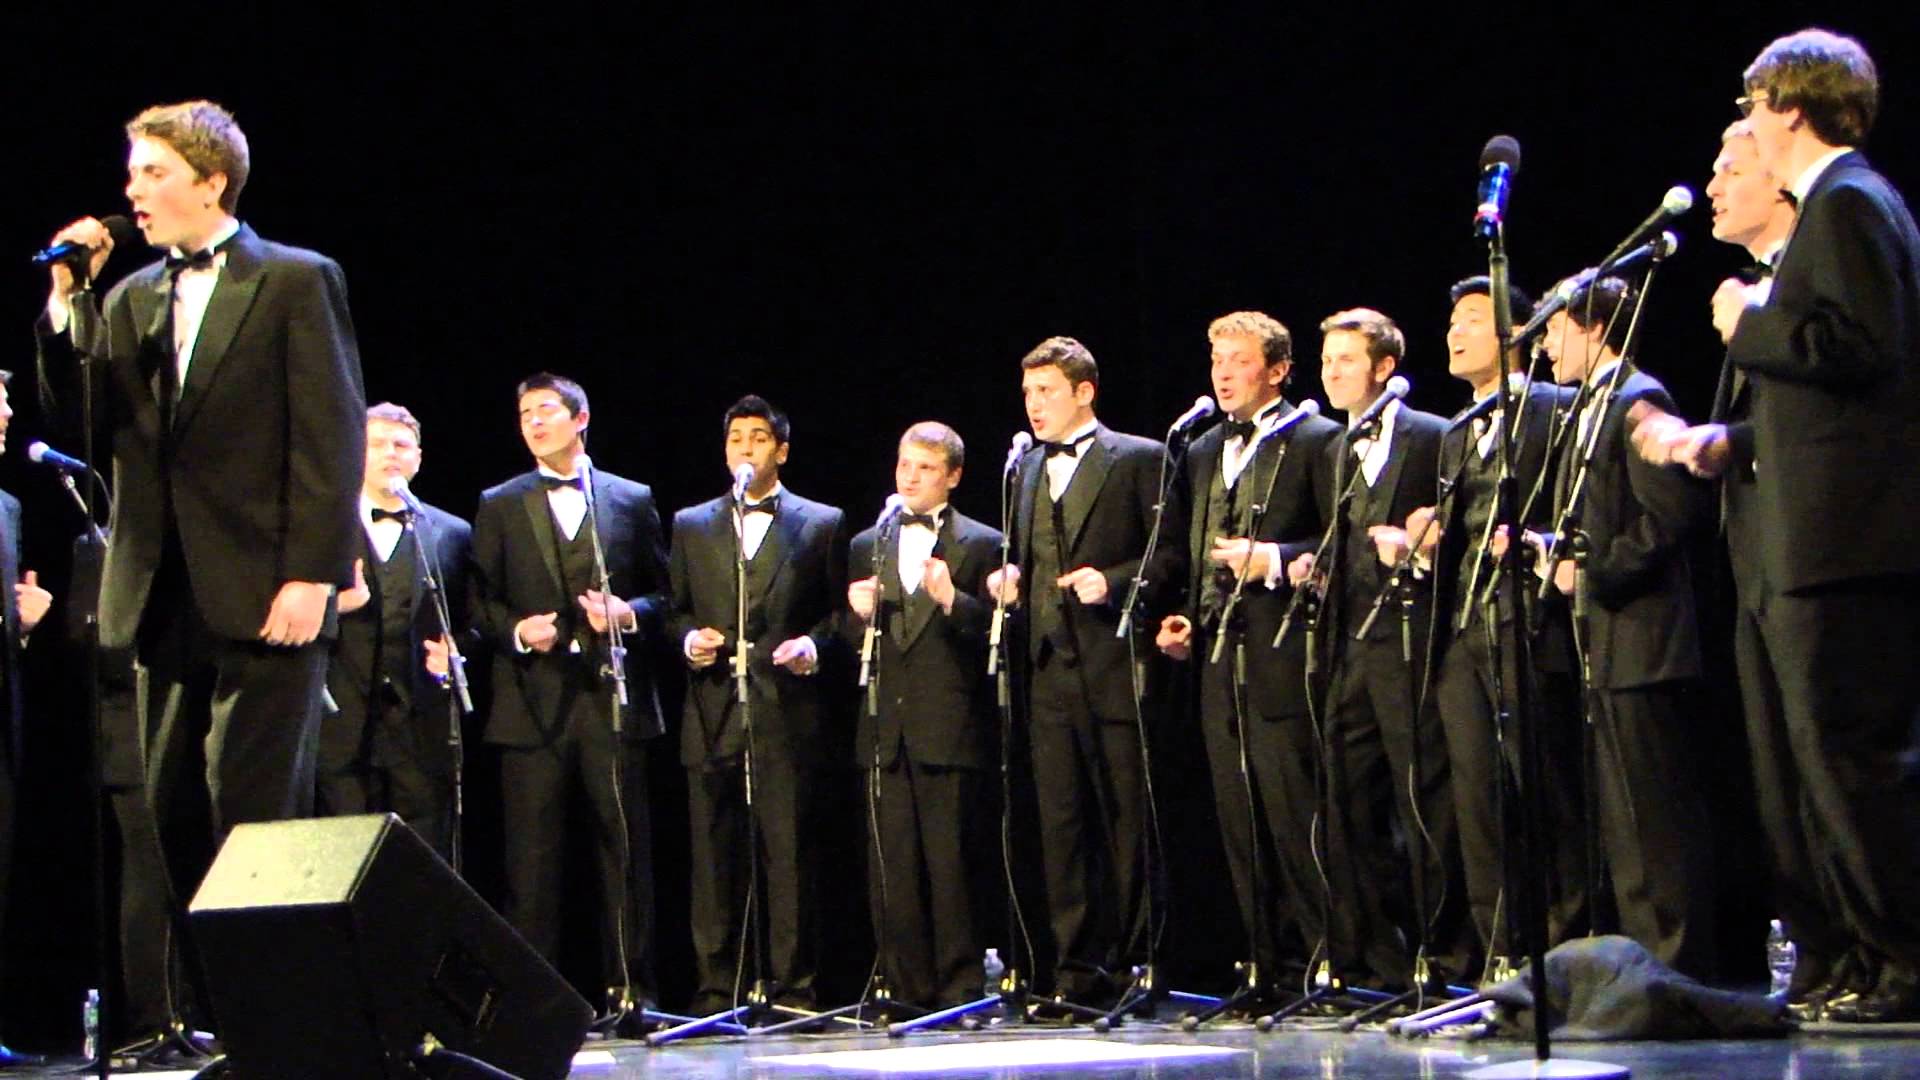 University expels A Capella group for sexual pranks